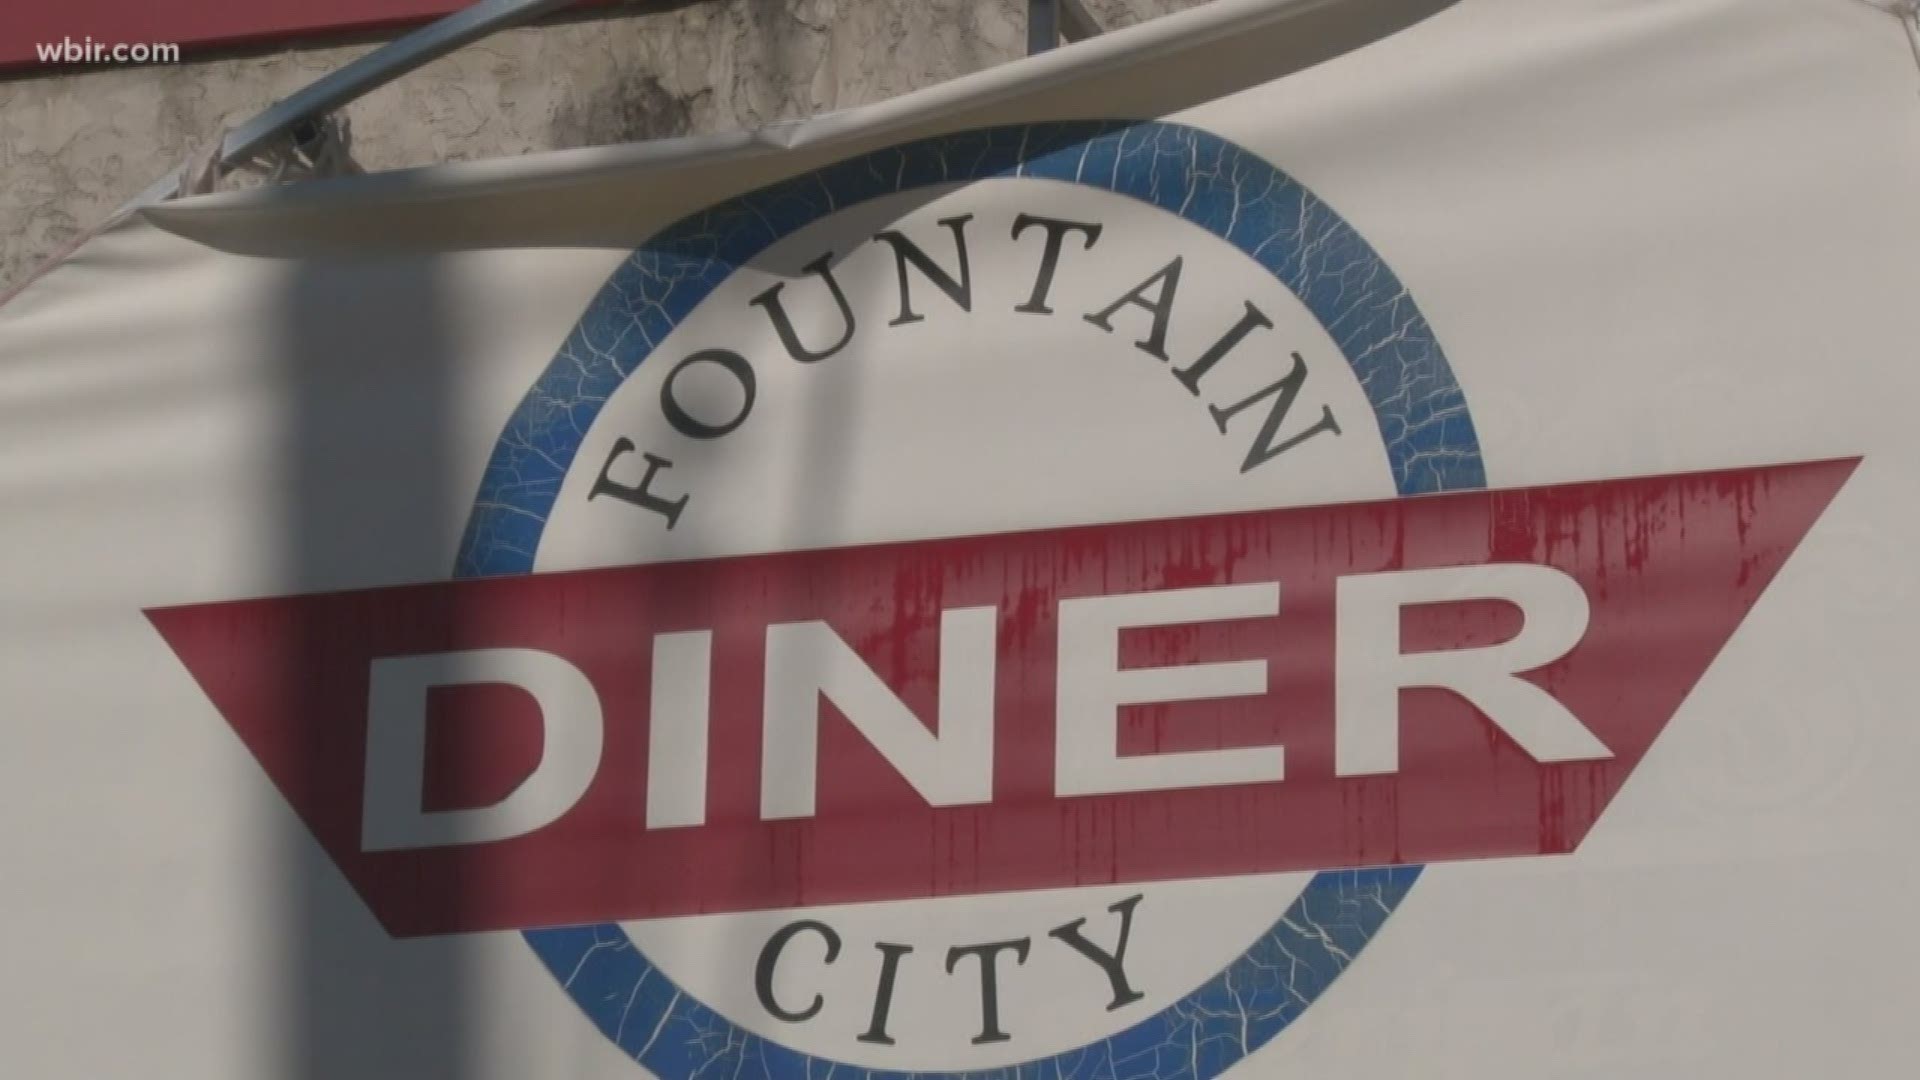 A property owner near the Old Fountain City Diner applied to have the spot rezoned, according to records.